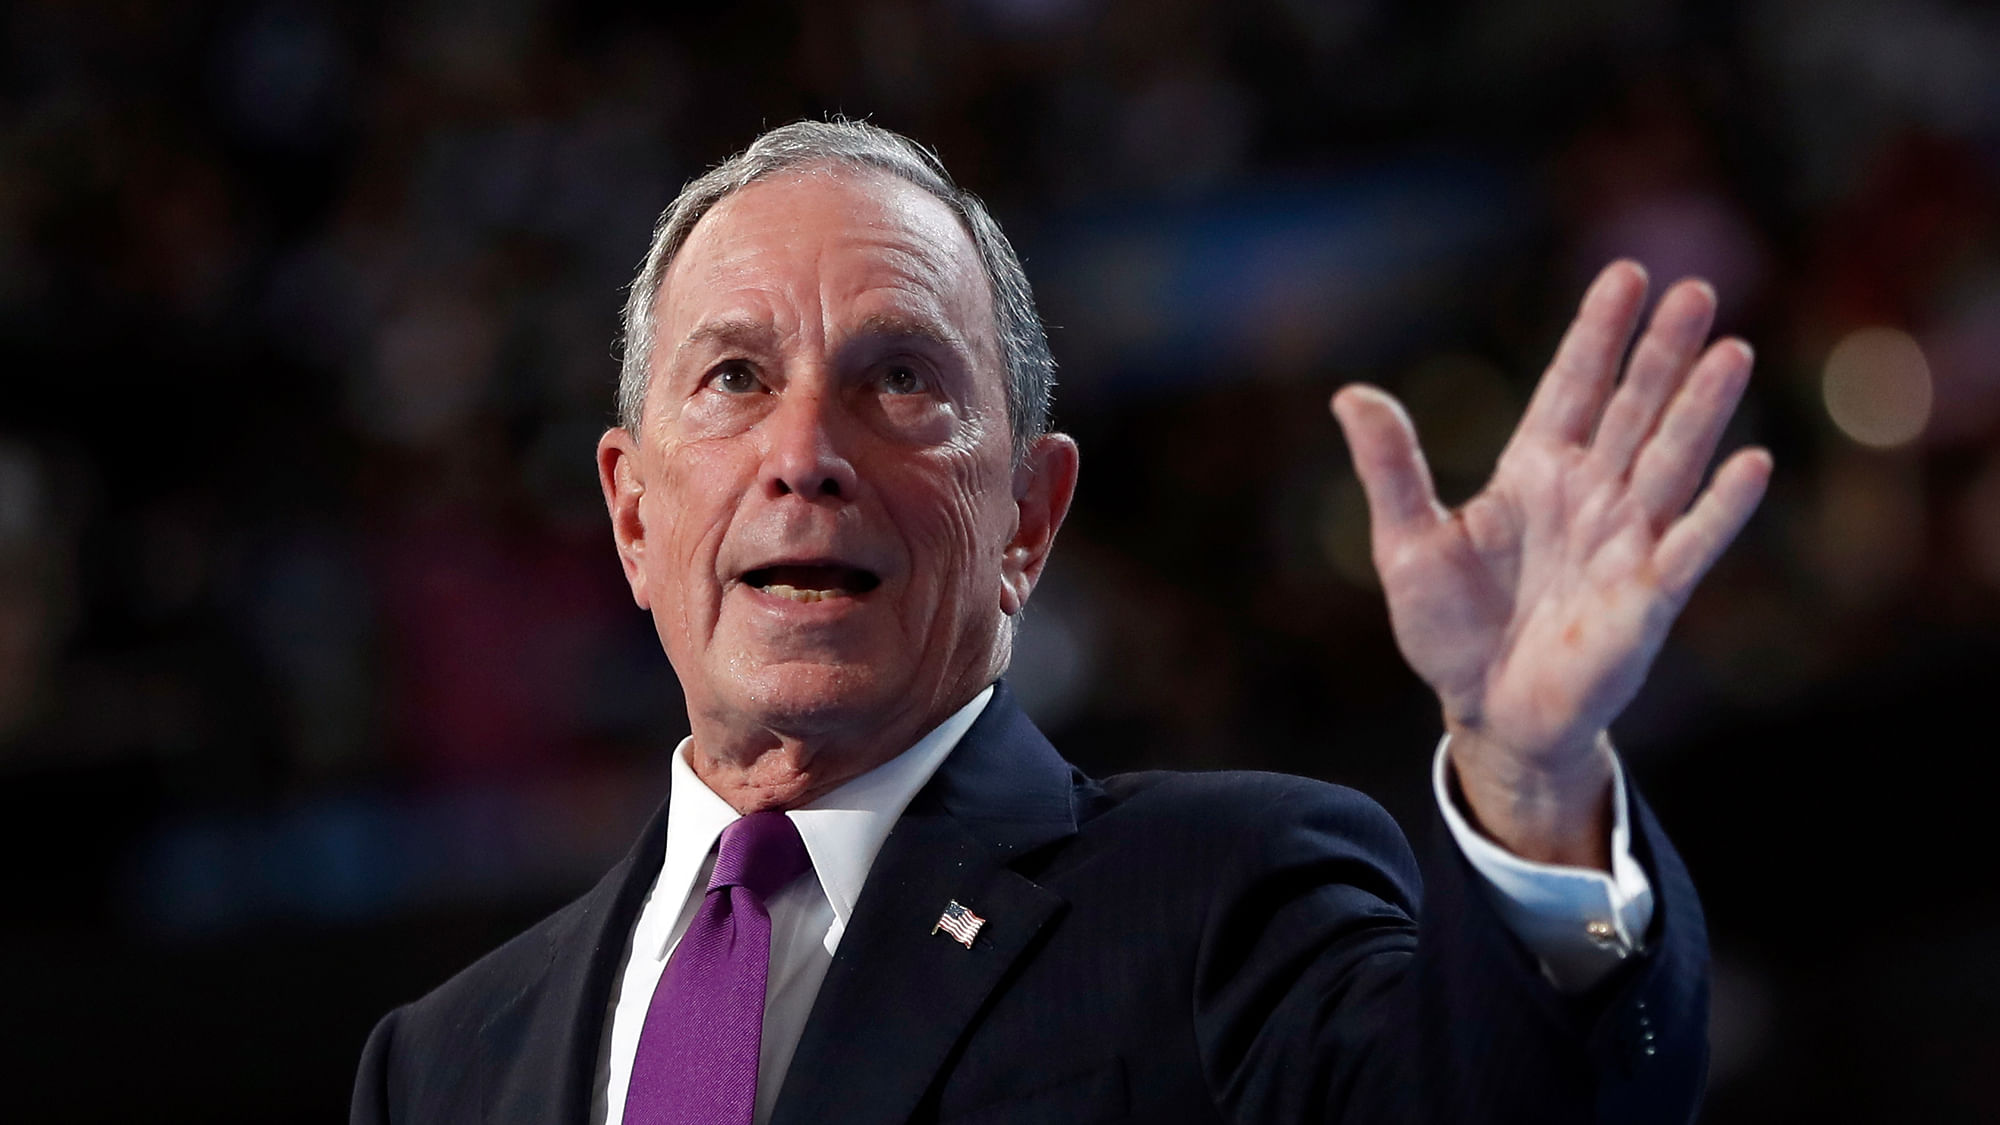 Former New York City Mayor Michael Bloomberg endorsed Hillary Clinton at the Democratic National Convention. (Photo: AP)